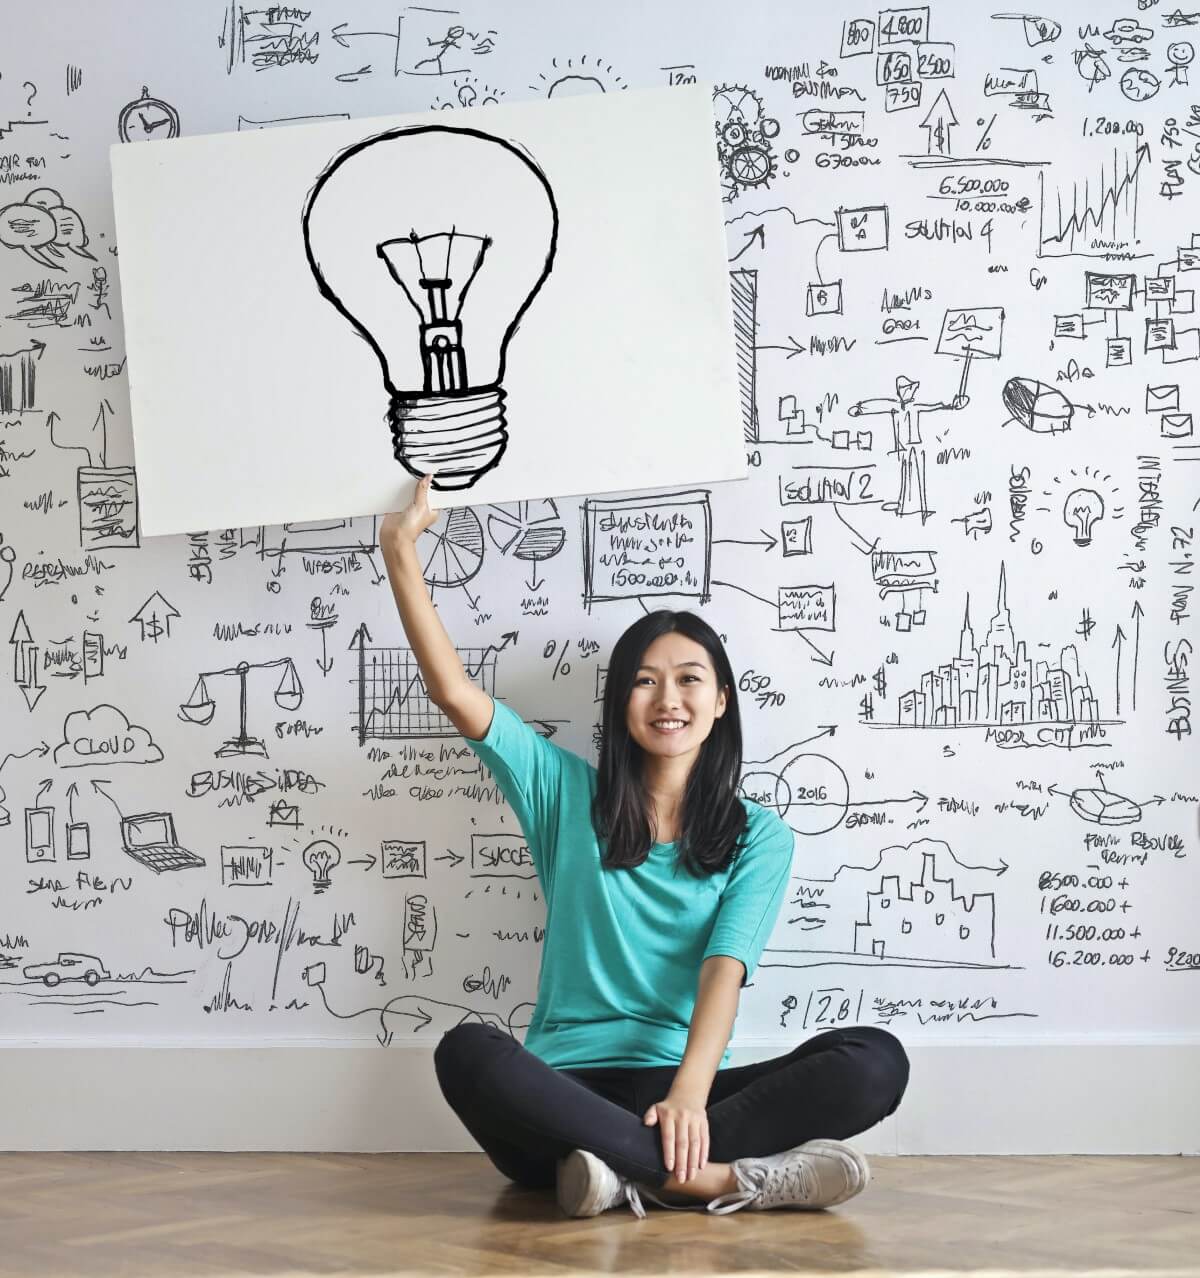 A portrait of a young Asian female sitting cross-legged on the floor against a white wall filled with equations and charts, holding up a placard with a light bulb scribbled on it.